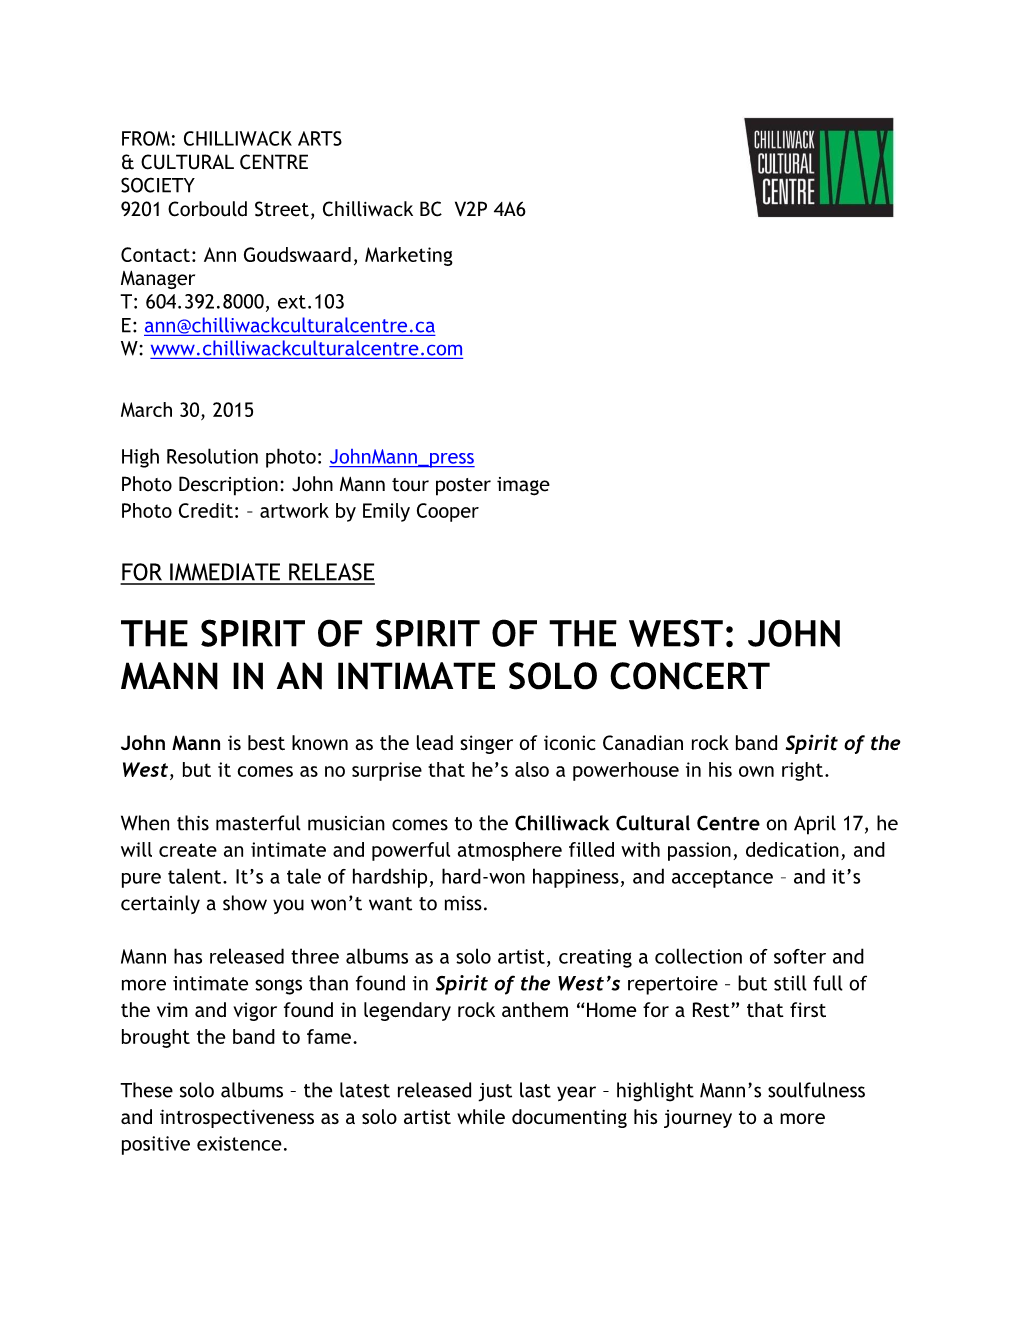 The Spirit of Spirit of the West: John Mann in an Intimate Solo Concert